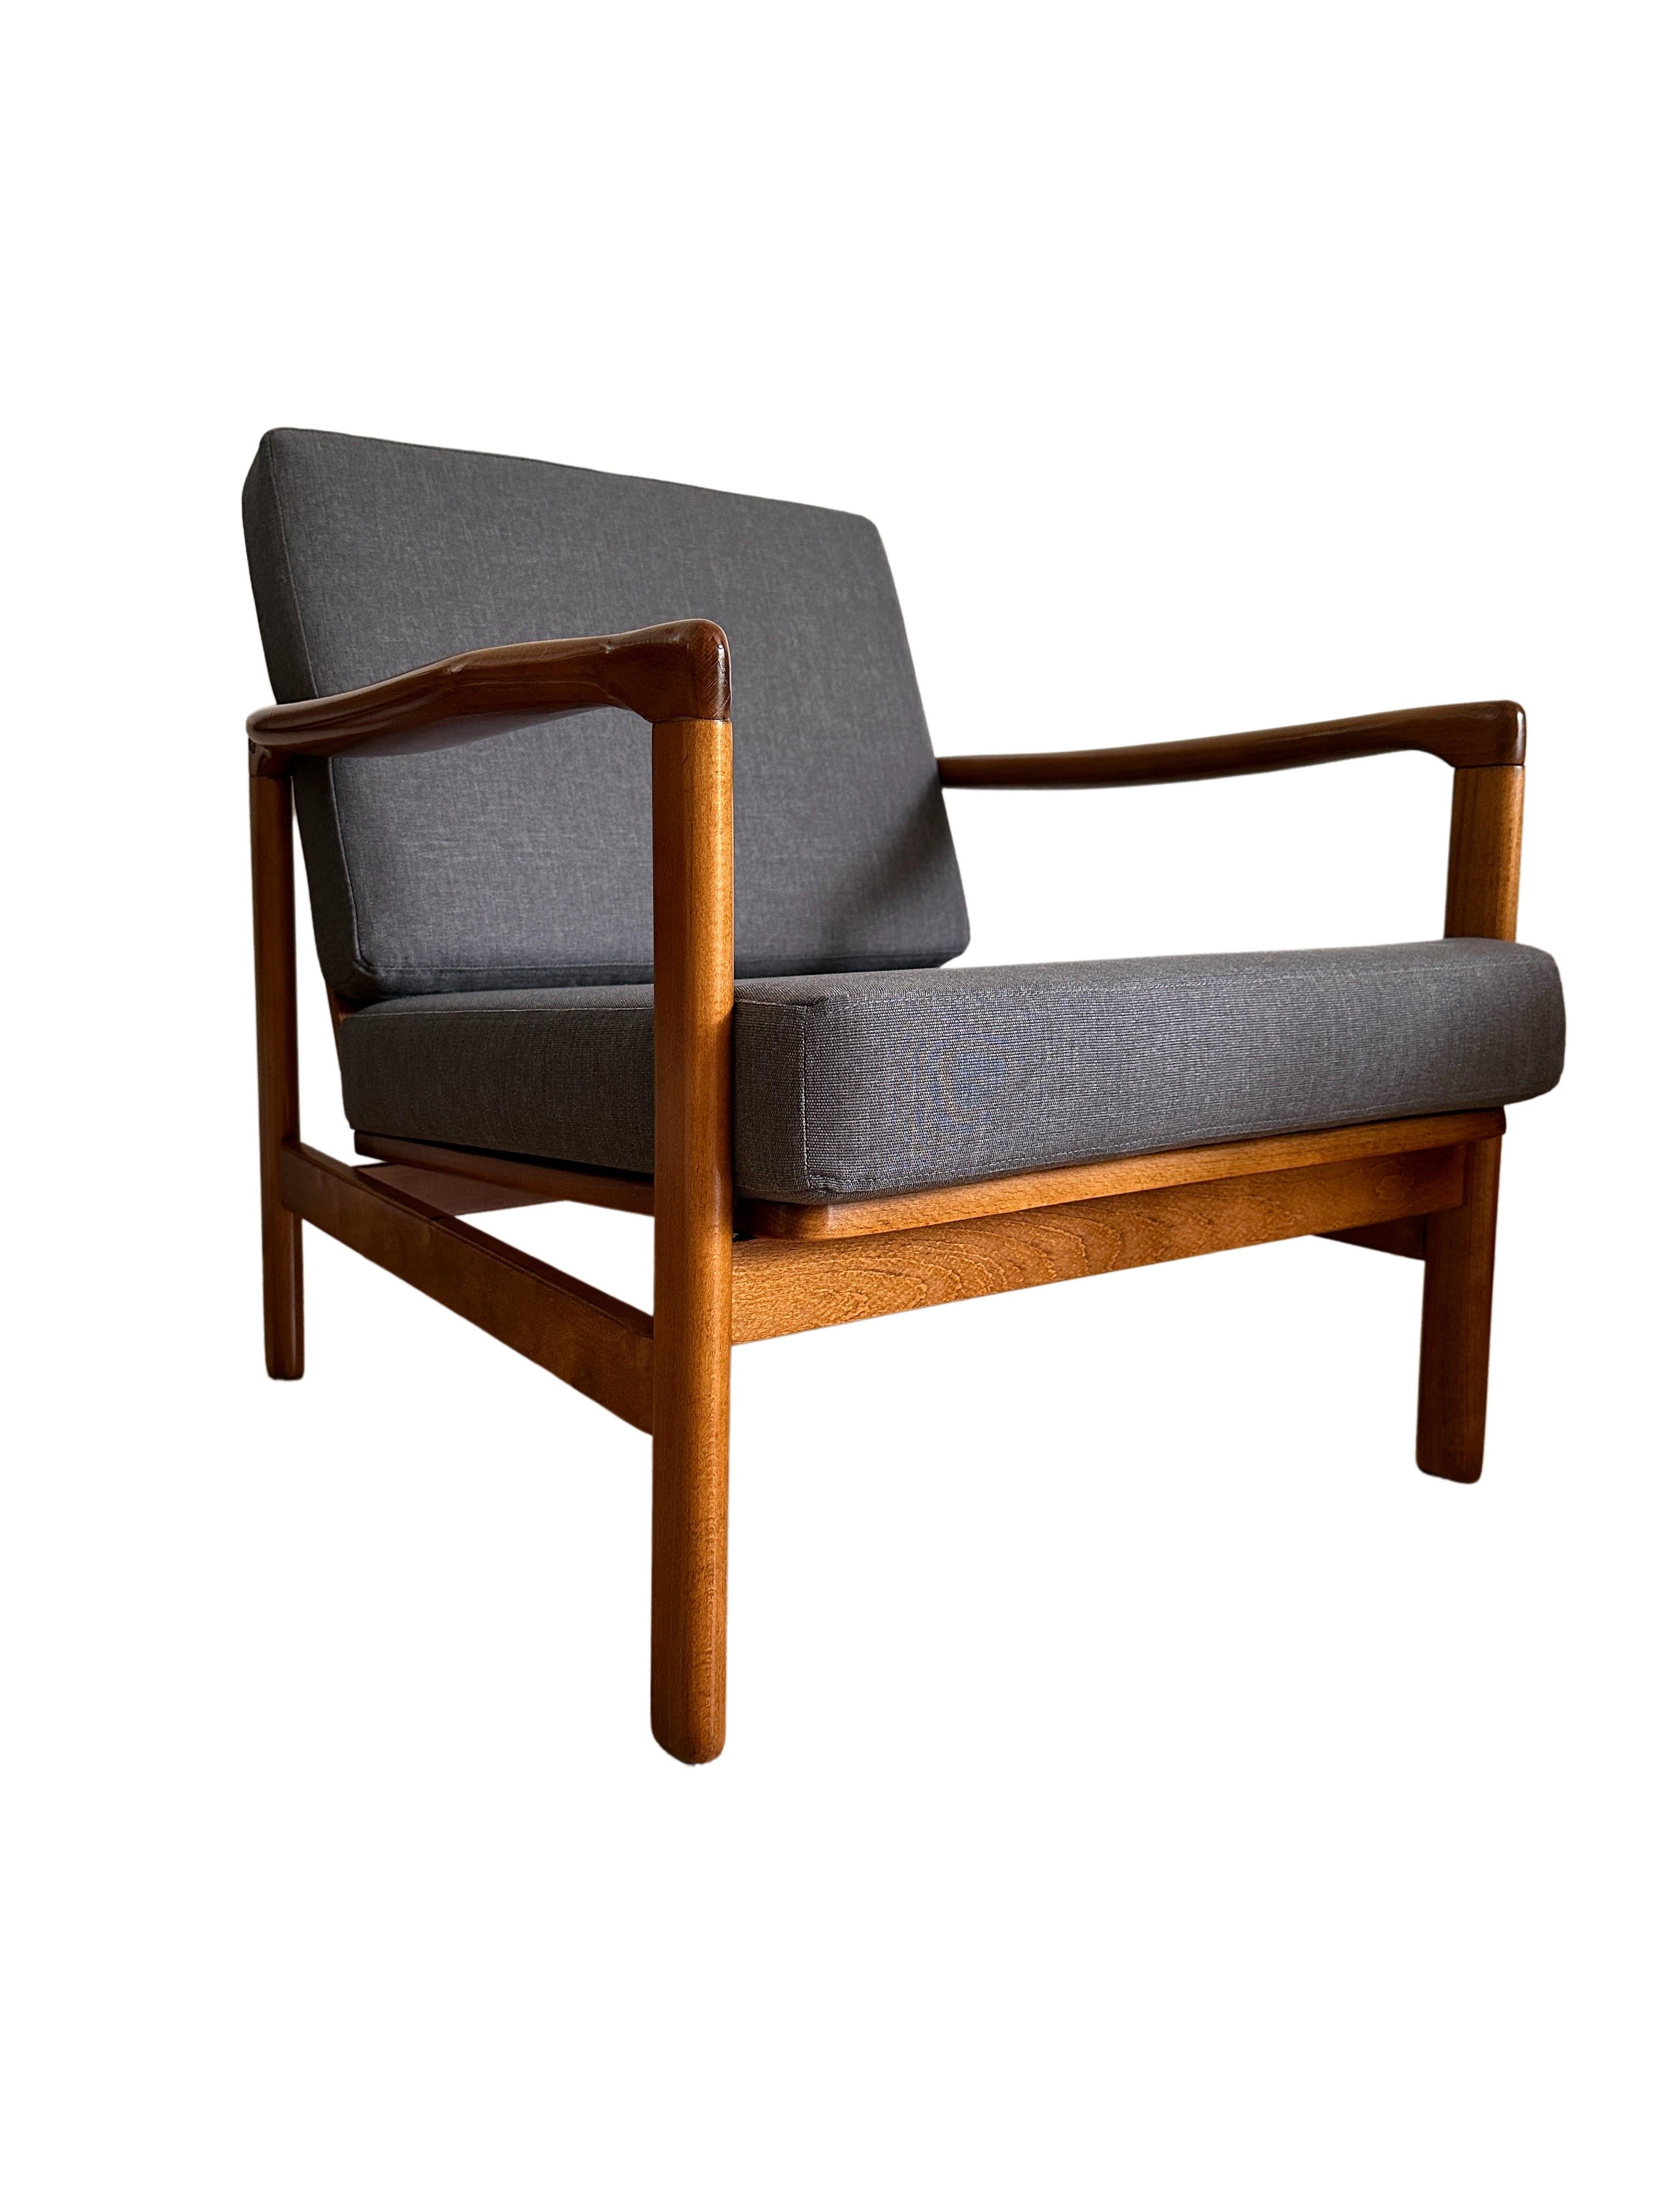 Mid-Century Armchair, Wood and Grey Kvadrat Upholstery, Europe, 1960s For Sale 3